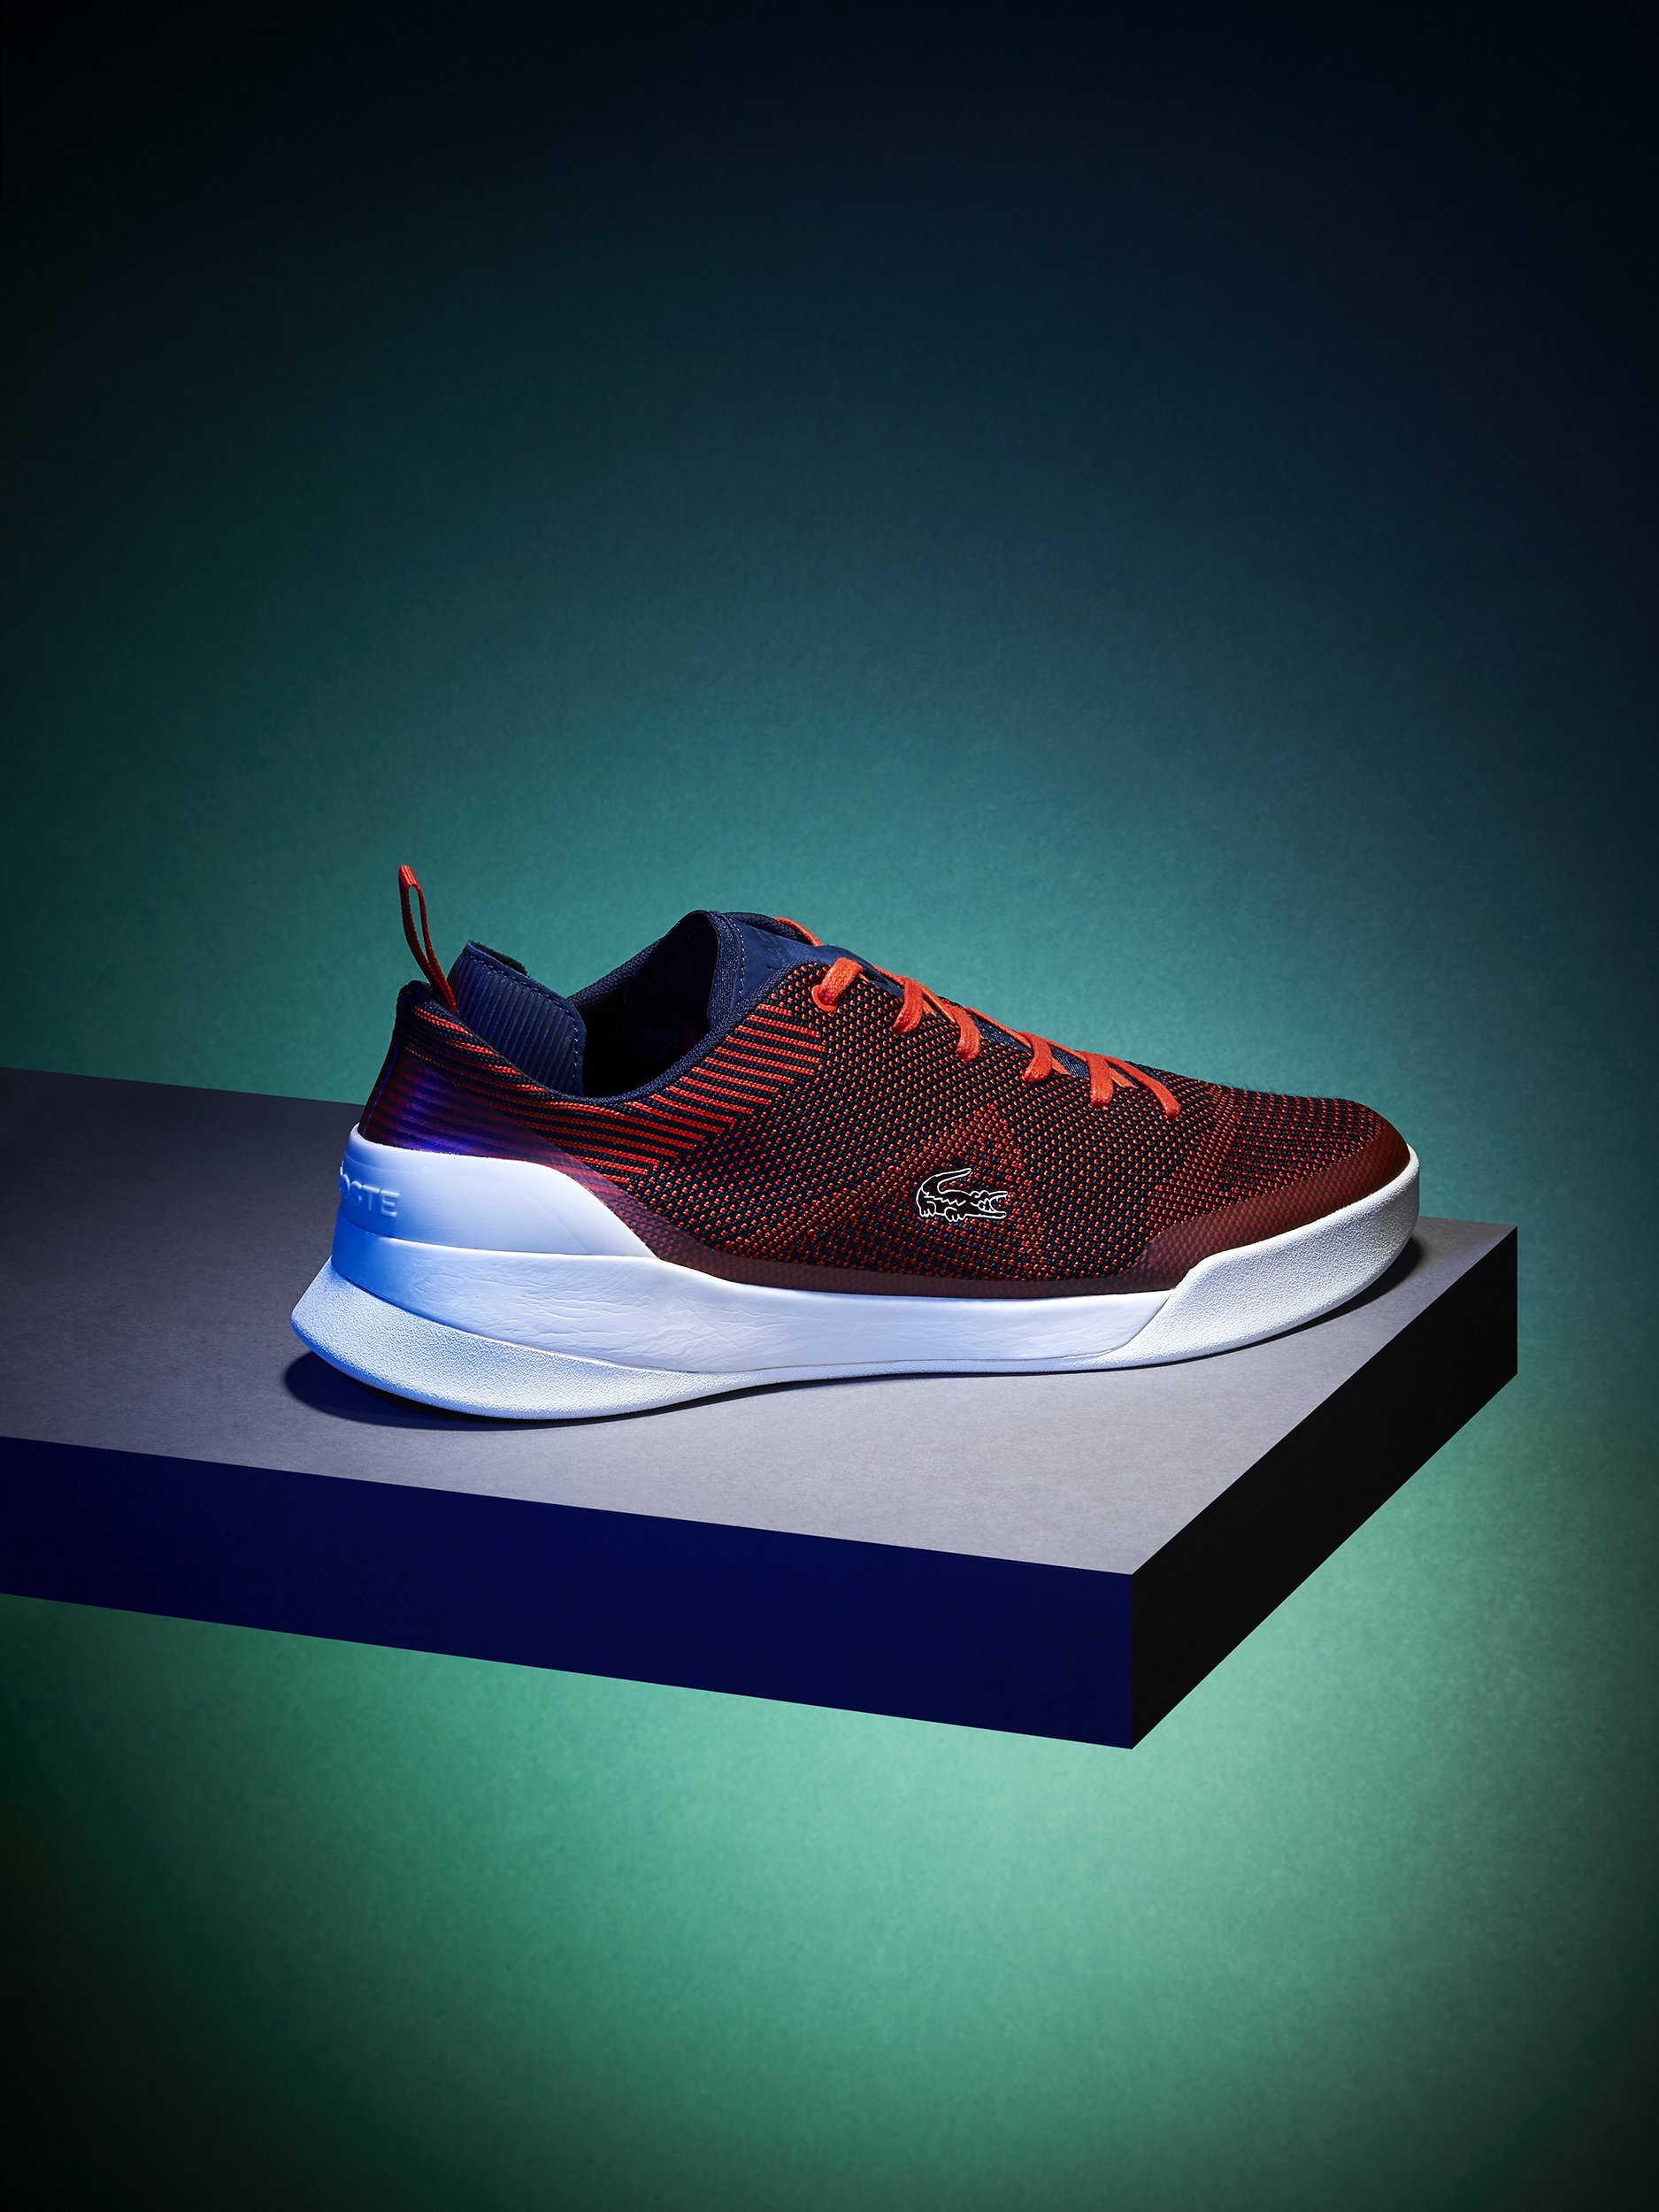 Lacoste Men's Trainers in Red - product photography by Simon Lyle Ritchie